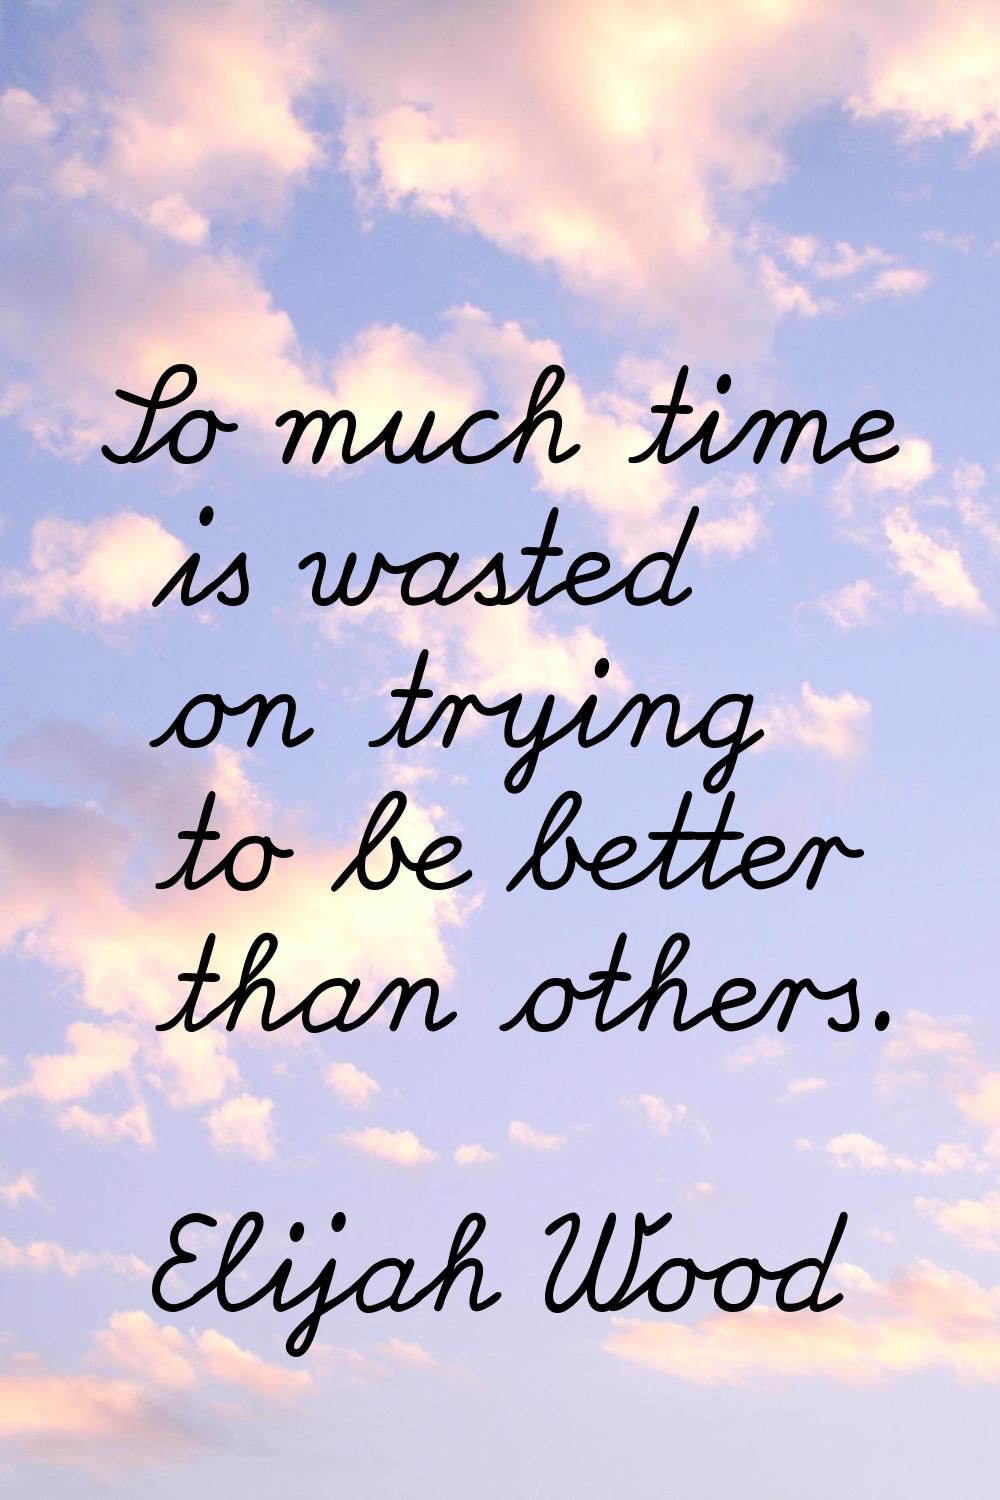 So much time is wasted on trying to be better than others.